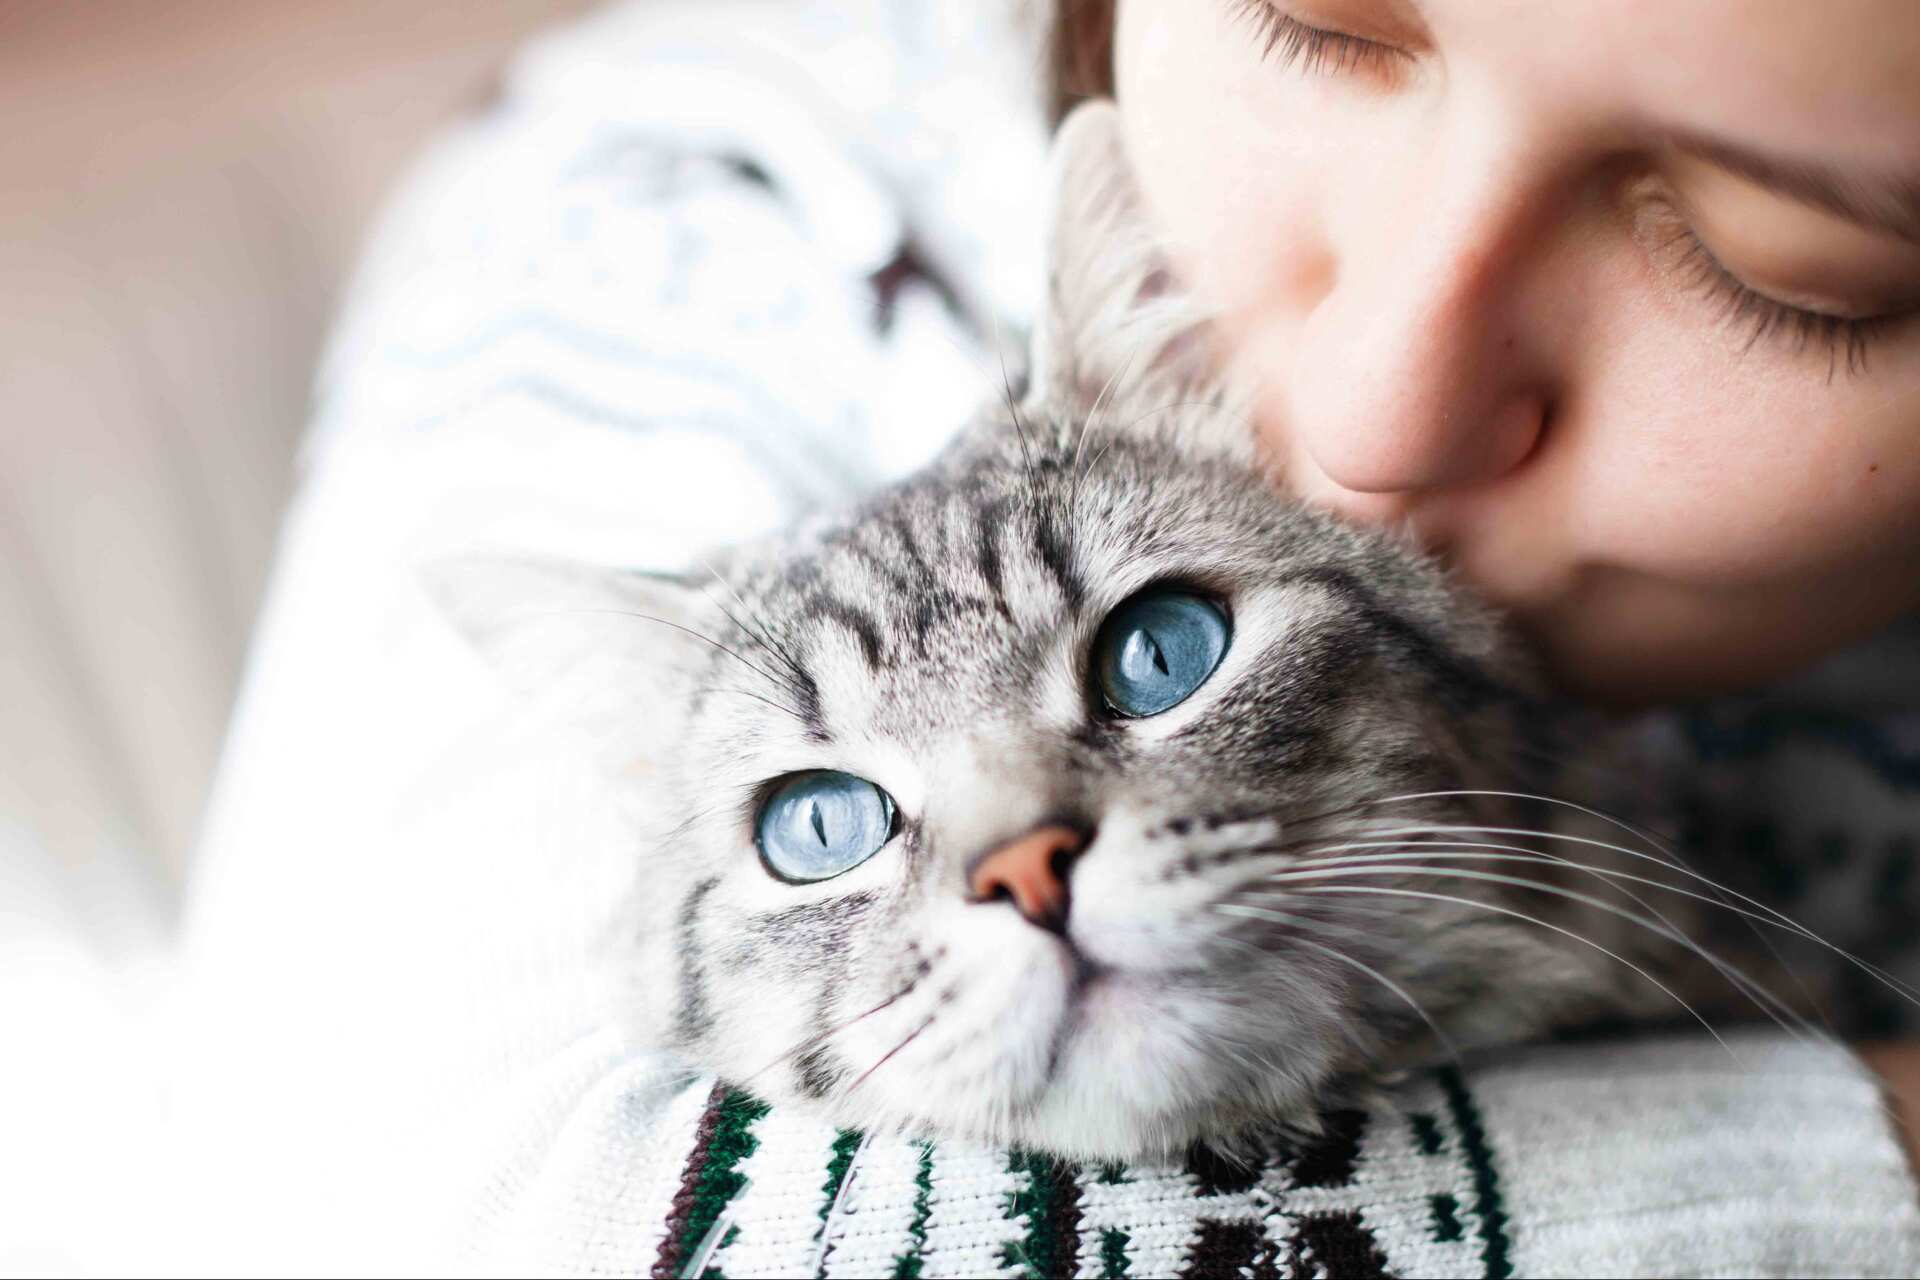 Woman at home kissing her lovely fluffy cat. Gray tabby cute kitten with blue eyes. Pets and lifestyle concept.